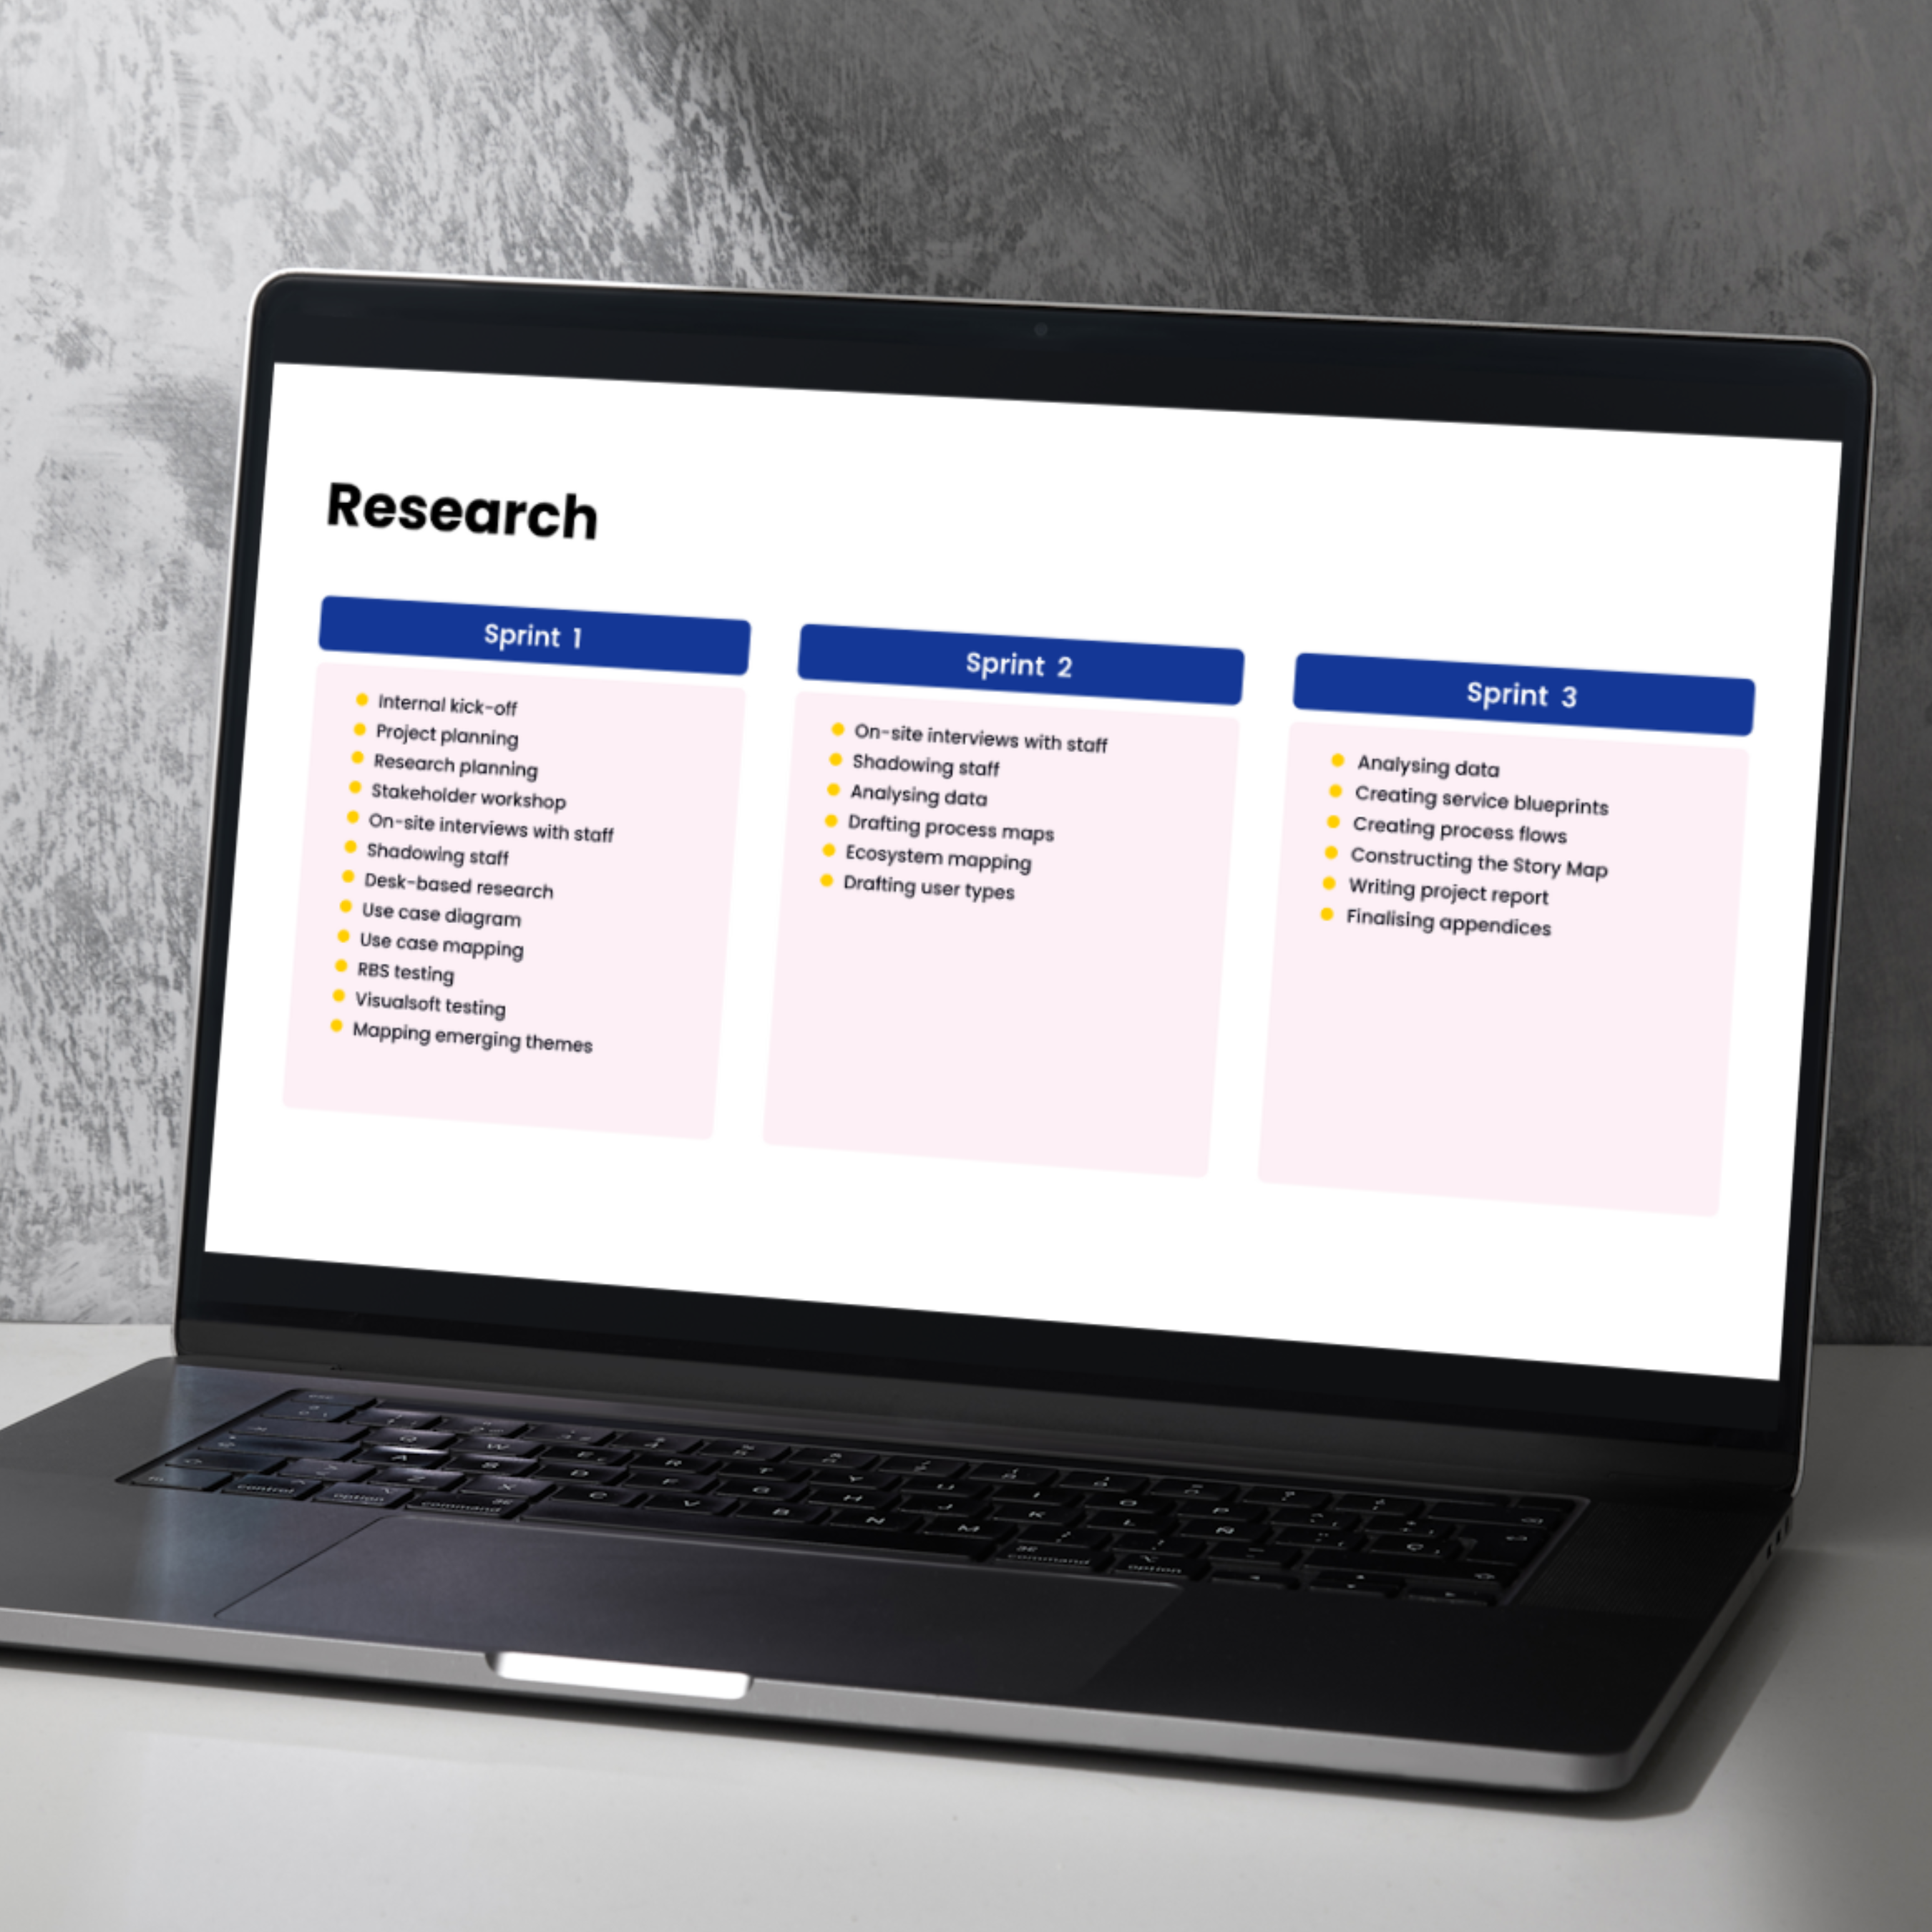 A laptop screen showing a slide of a presentation, with the title "Research" and three columns listing research activity across three sprints